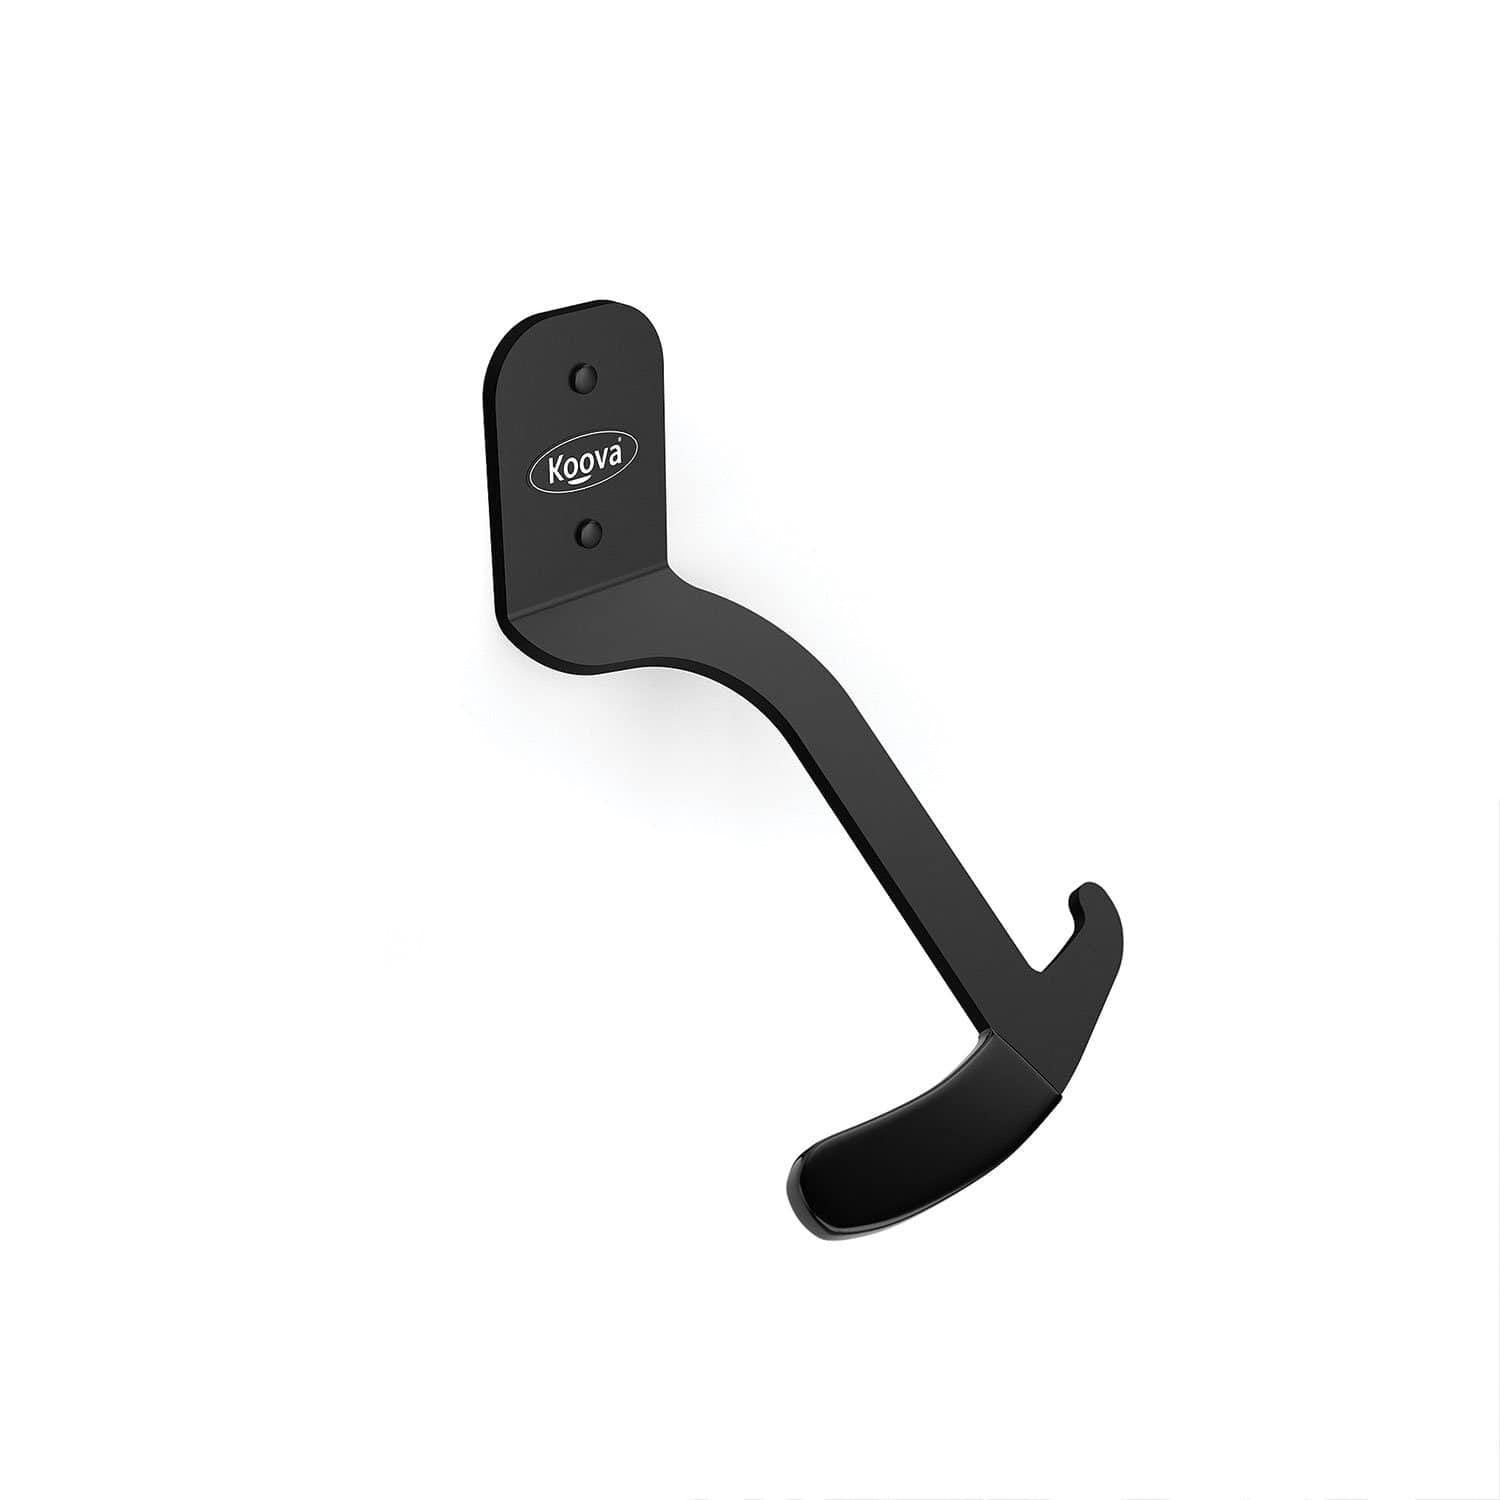 Single bike hook, mounts on wall for vertical bicycle storage